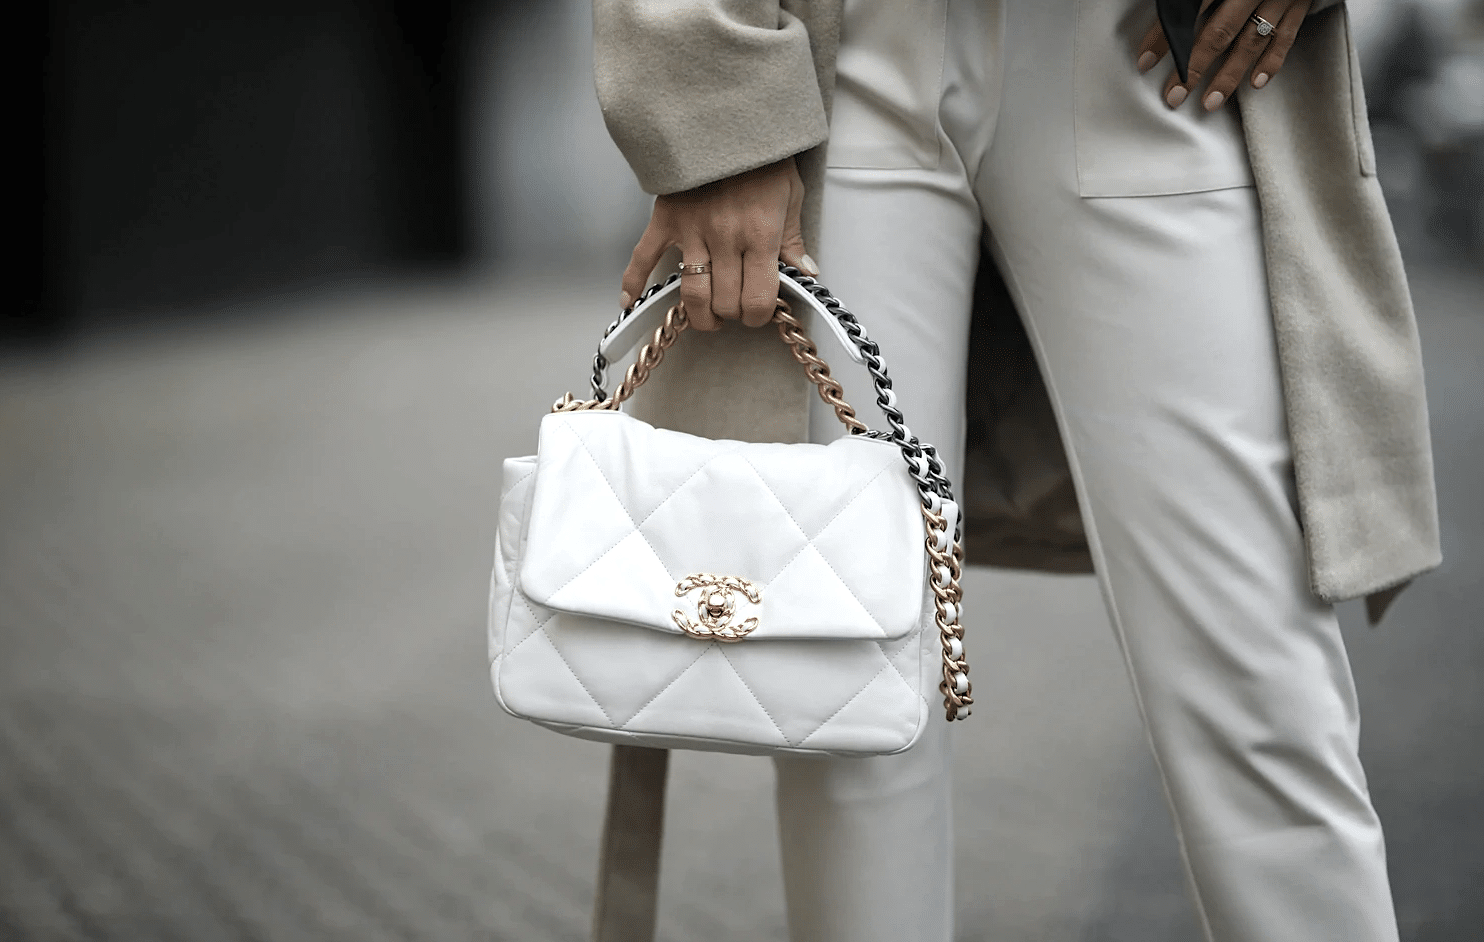 chanel 19 bag in white